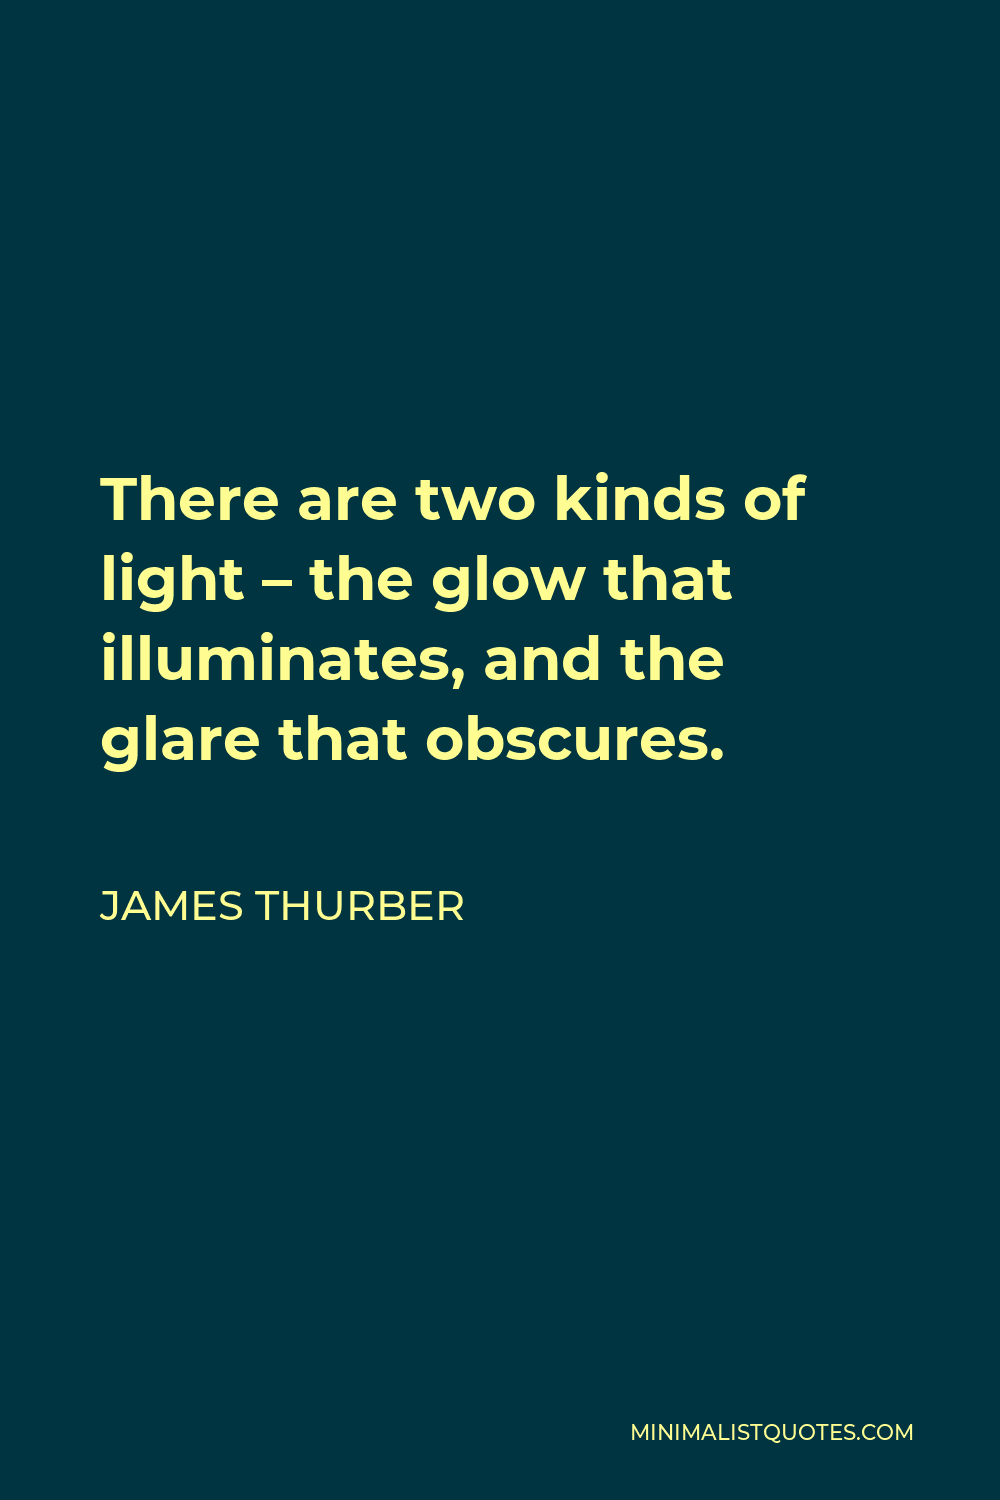 James Thurber Quote - There are two kinds of light – the glow that illuminates, and the glare that obscures.